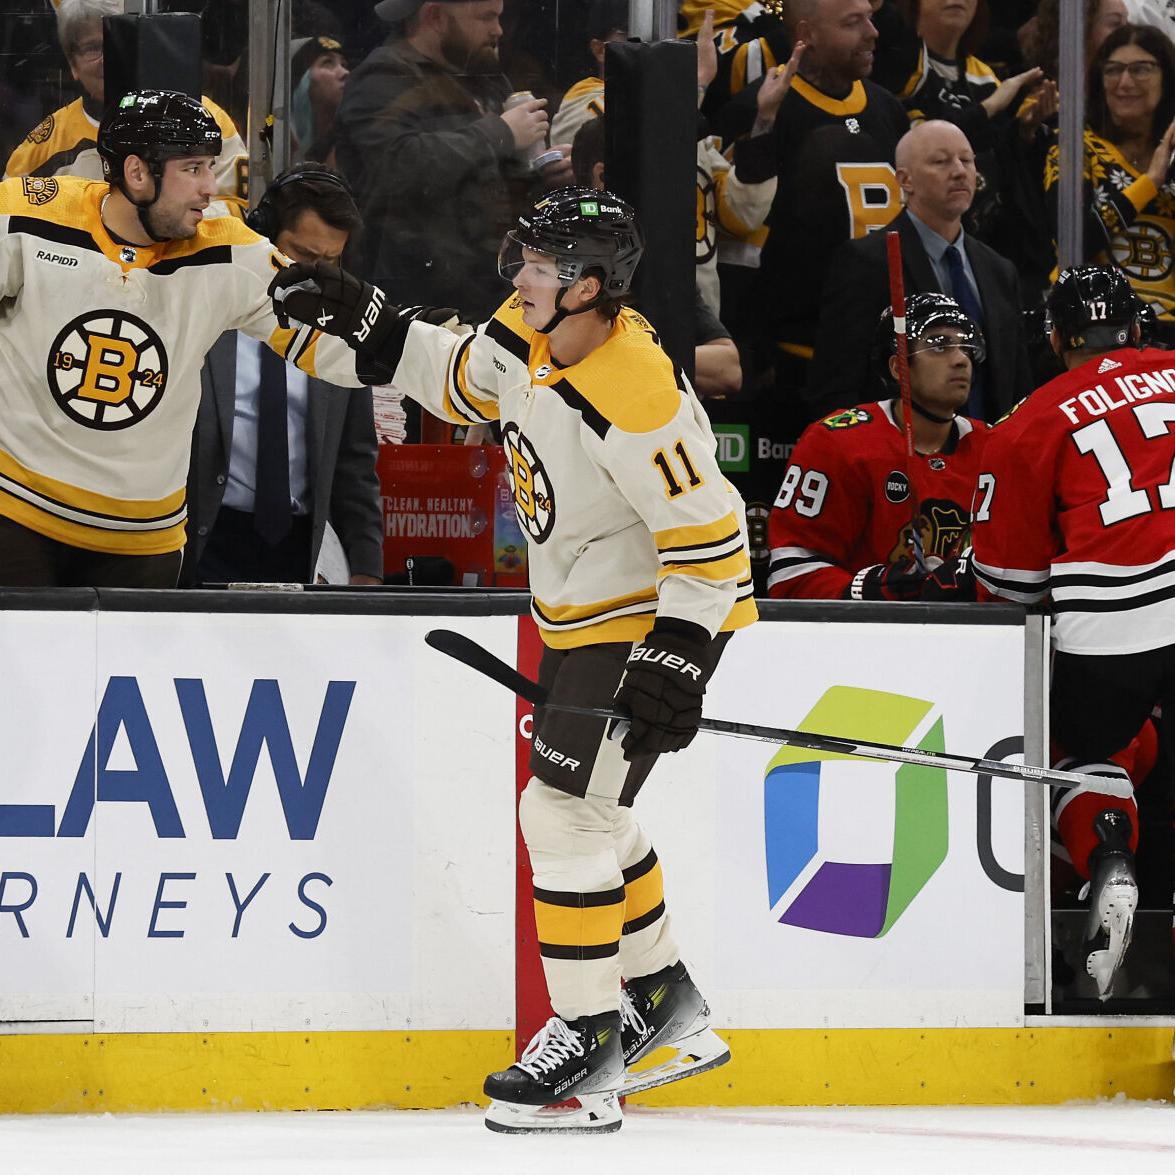 Fan favorite, Stanley Cup champ Lucic to rejoin Bruins, sources say